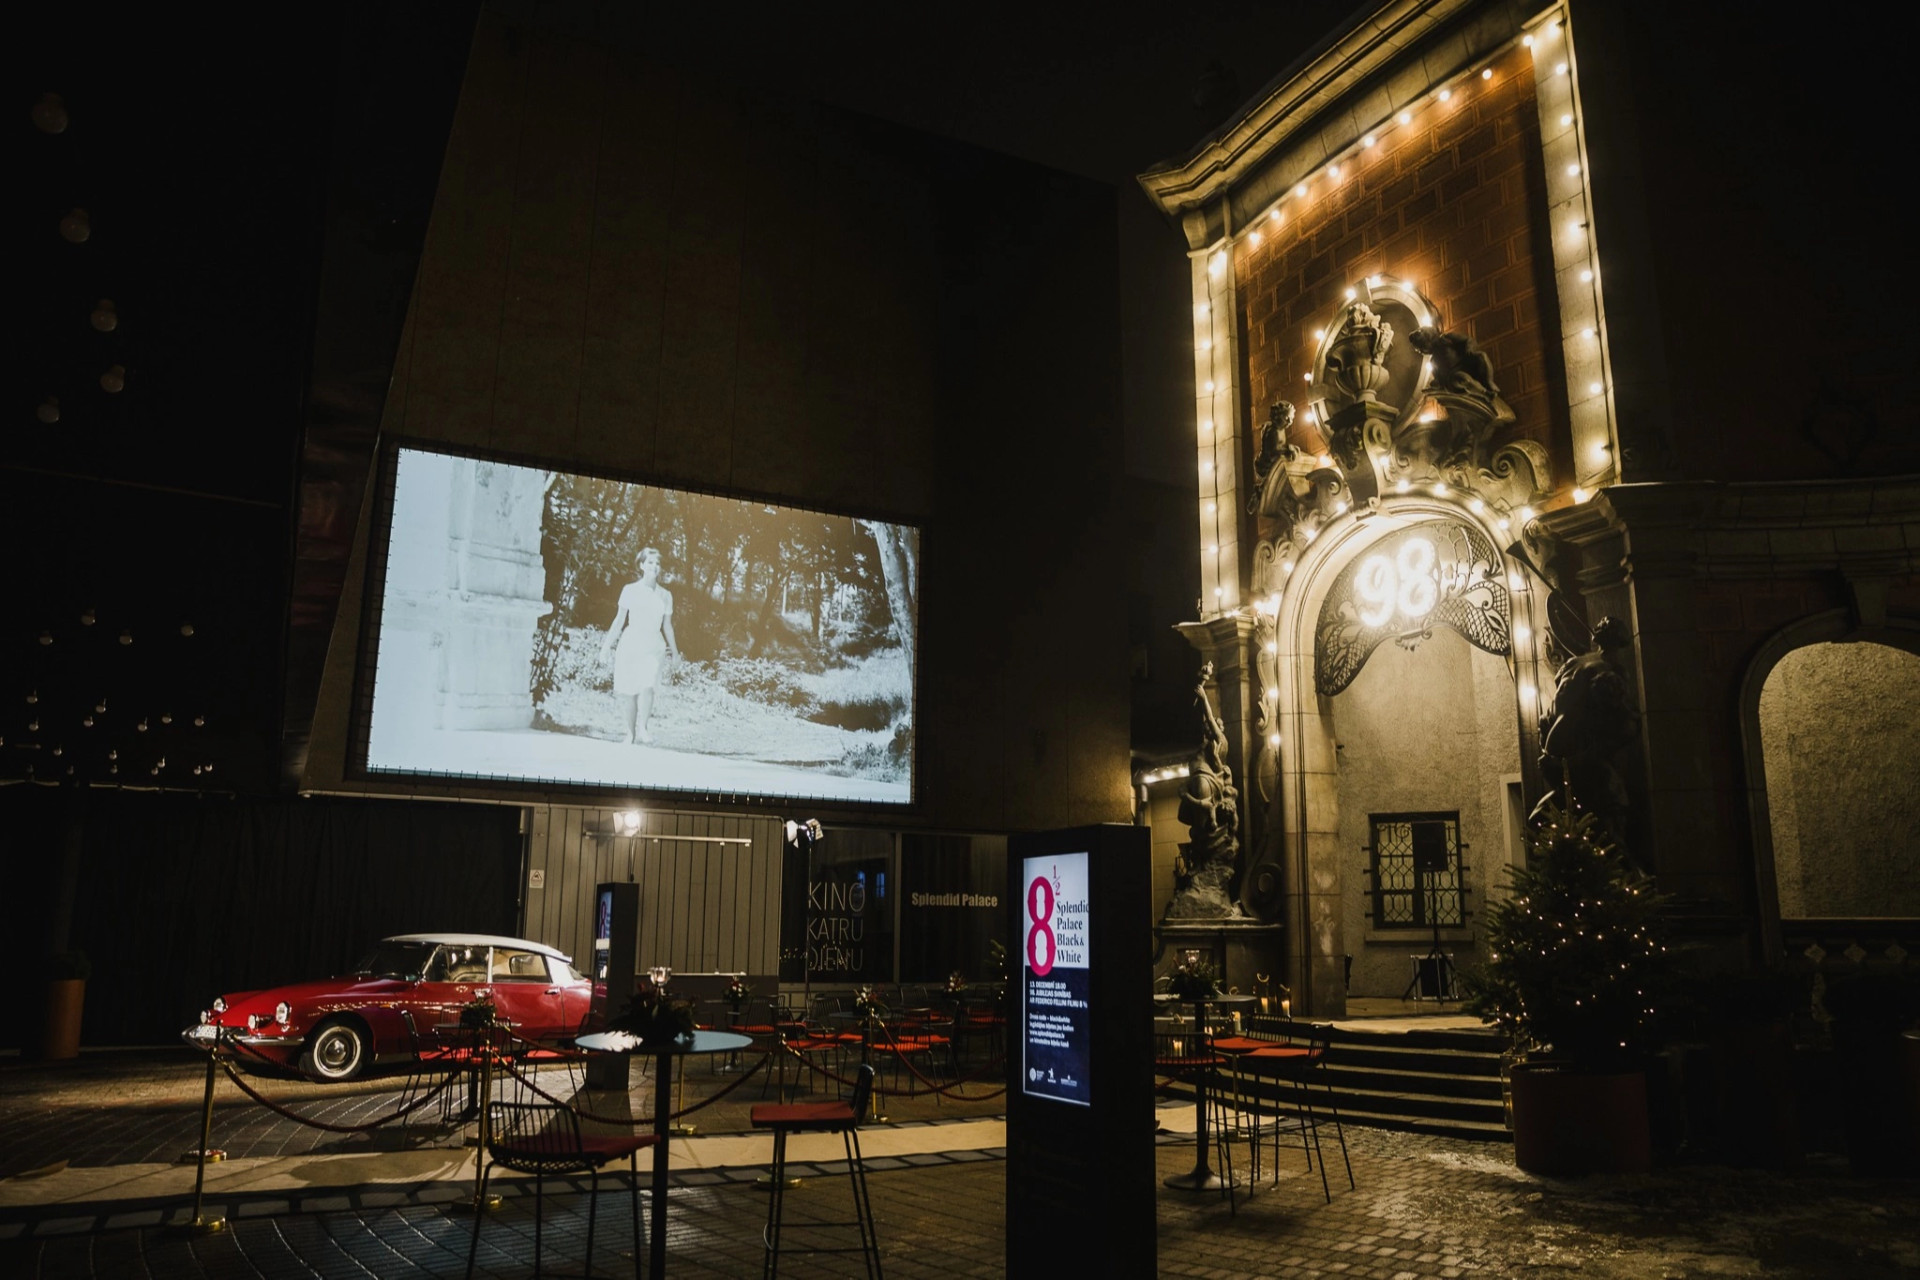 Cinema "Splendid Palace" | Riga | Event place - gallery picture